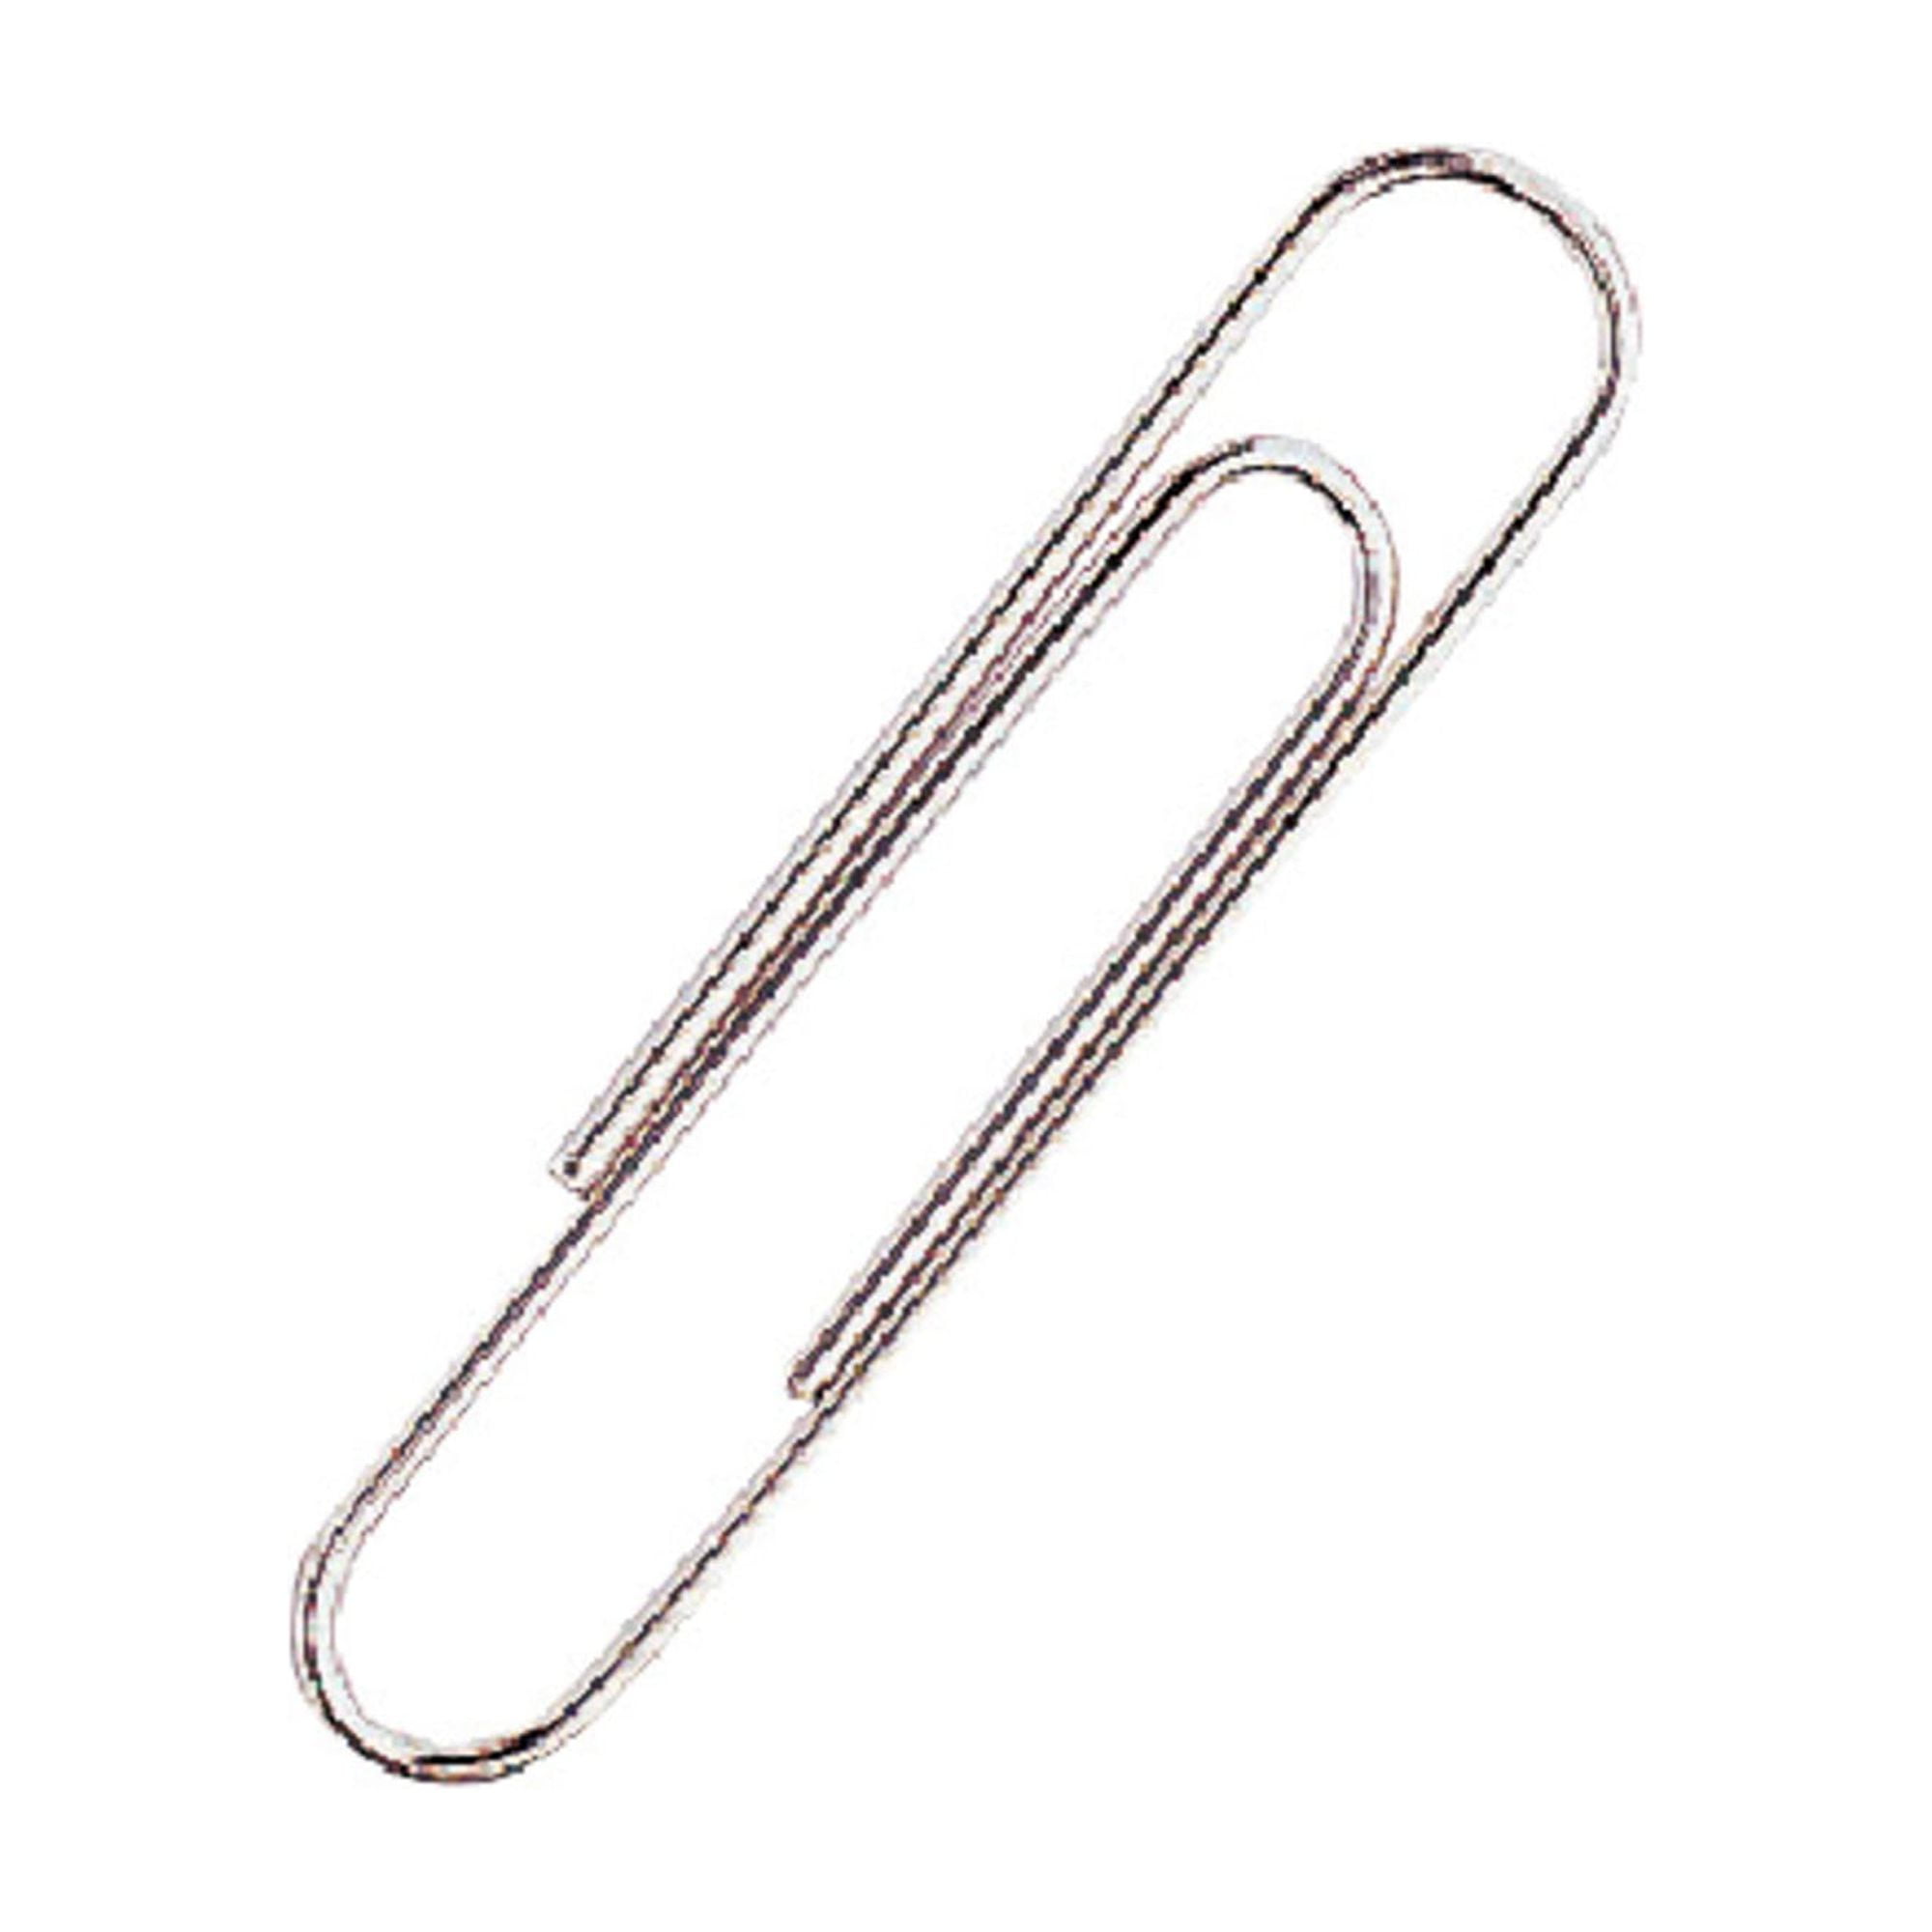 Acco Economy #3 Paper Clips, Small, Smooth Finish, 15/16 Inches Long, Silver, 1 Box of 100 Clips (72320)